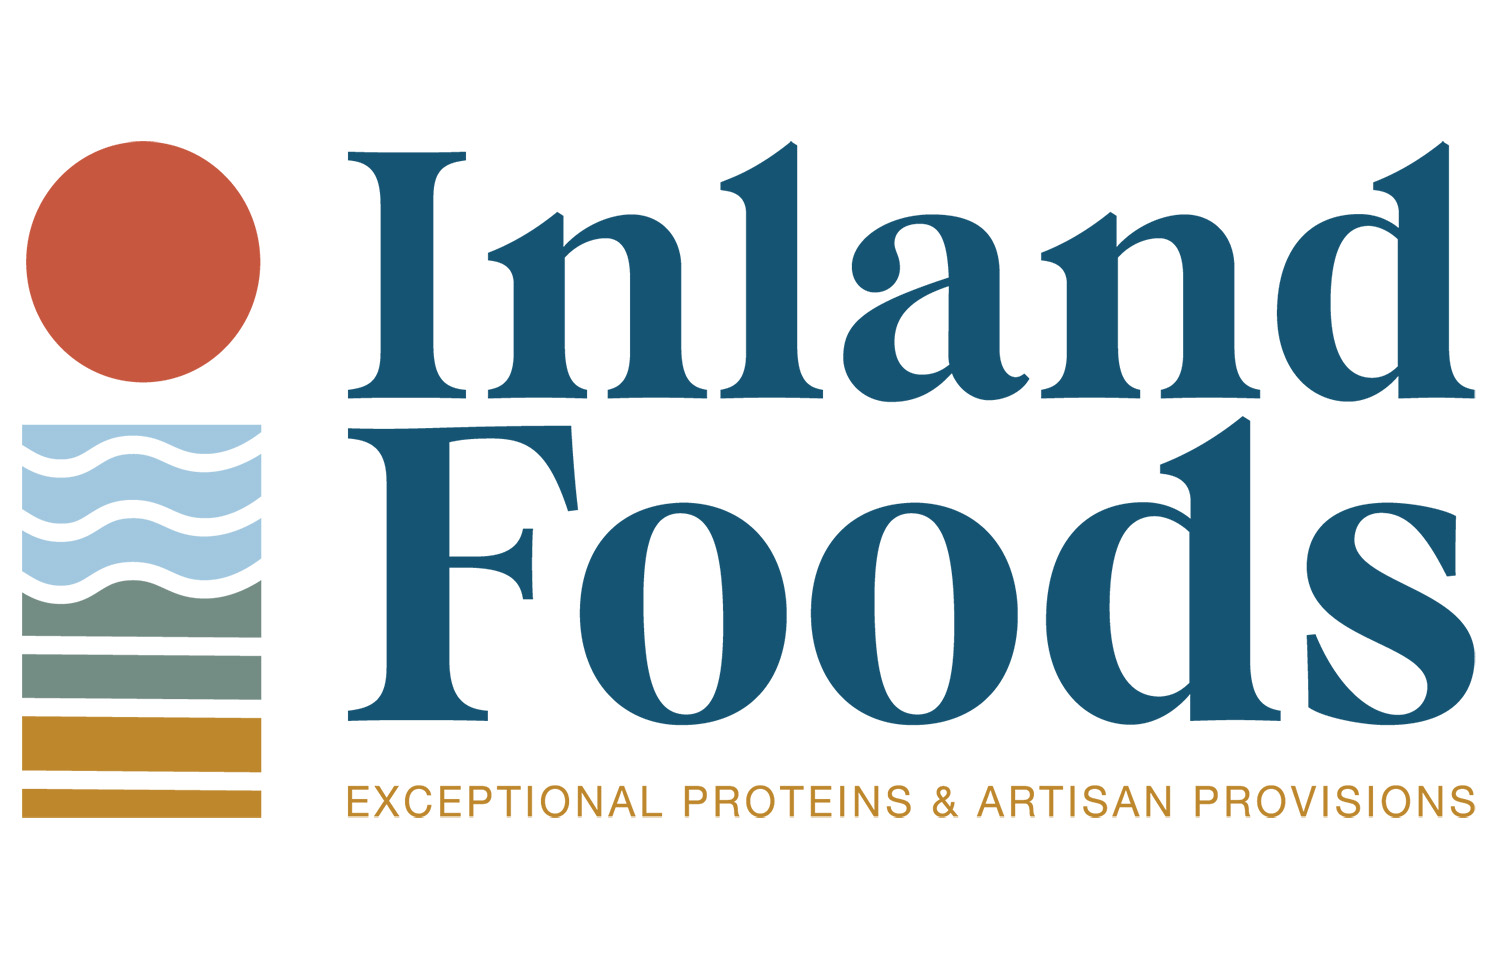 Inland Seafood rebrands as Inland Foods as it expands beyond